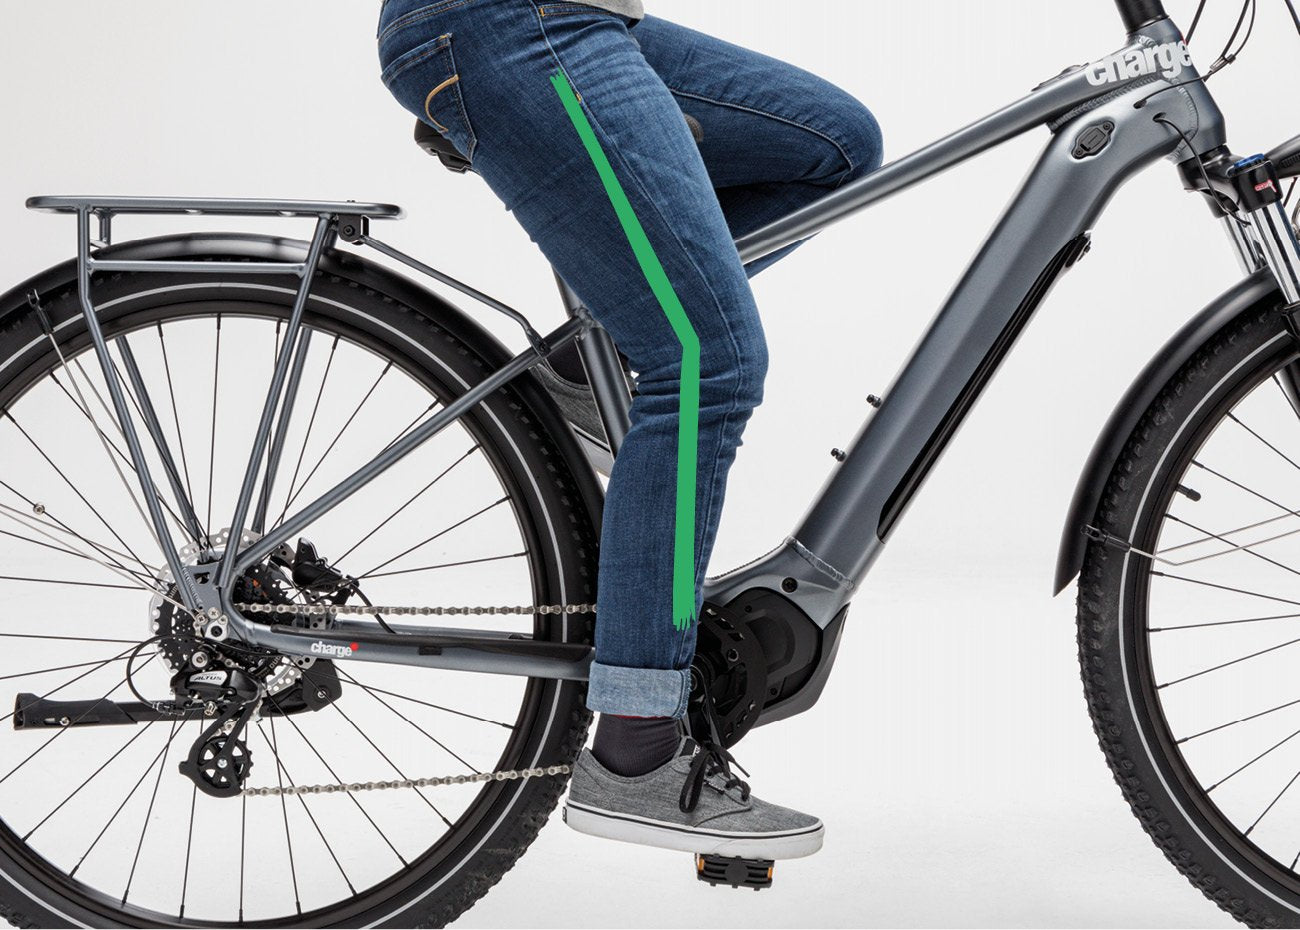 How to find the correct seat height for a electric bike for adults